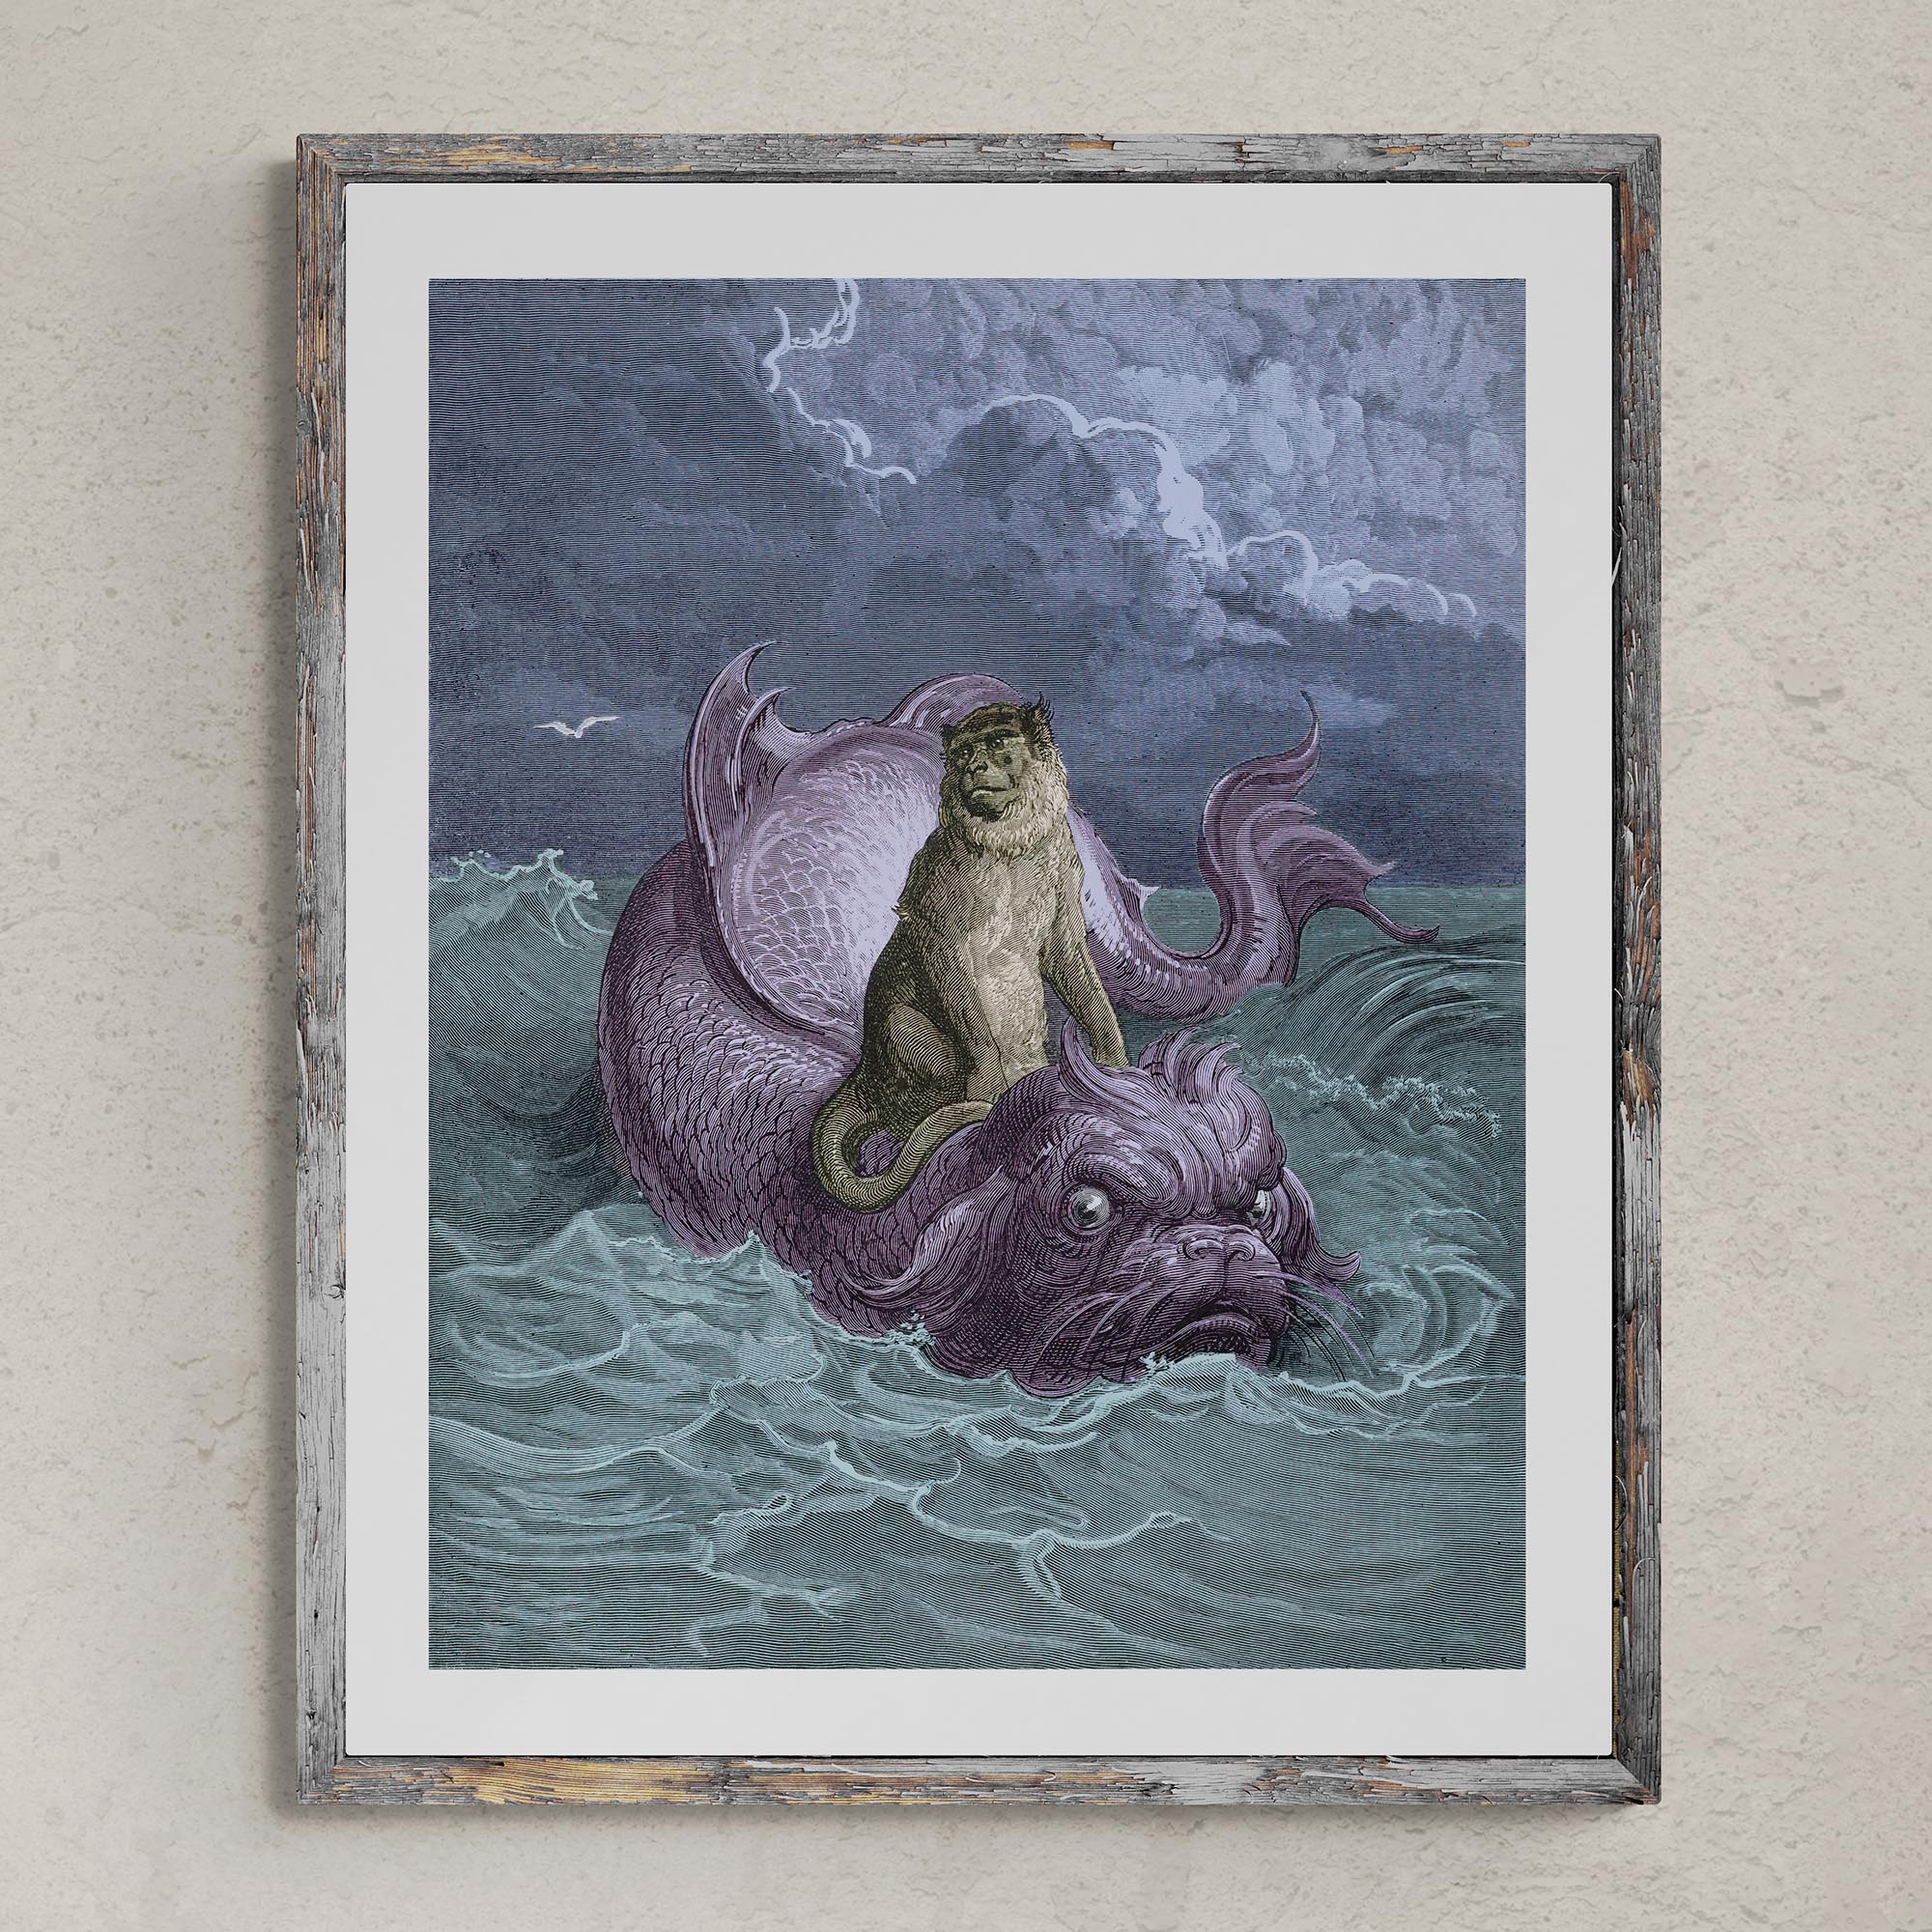 Fine art The Monkey and the Dolphin | Surreal Aesop's Fable Illustrated by Gustave Dore | Marine Life Nautical Wall Decor Fine Art Print